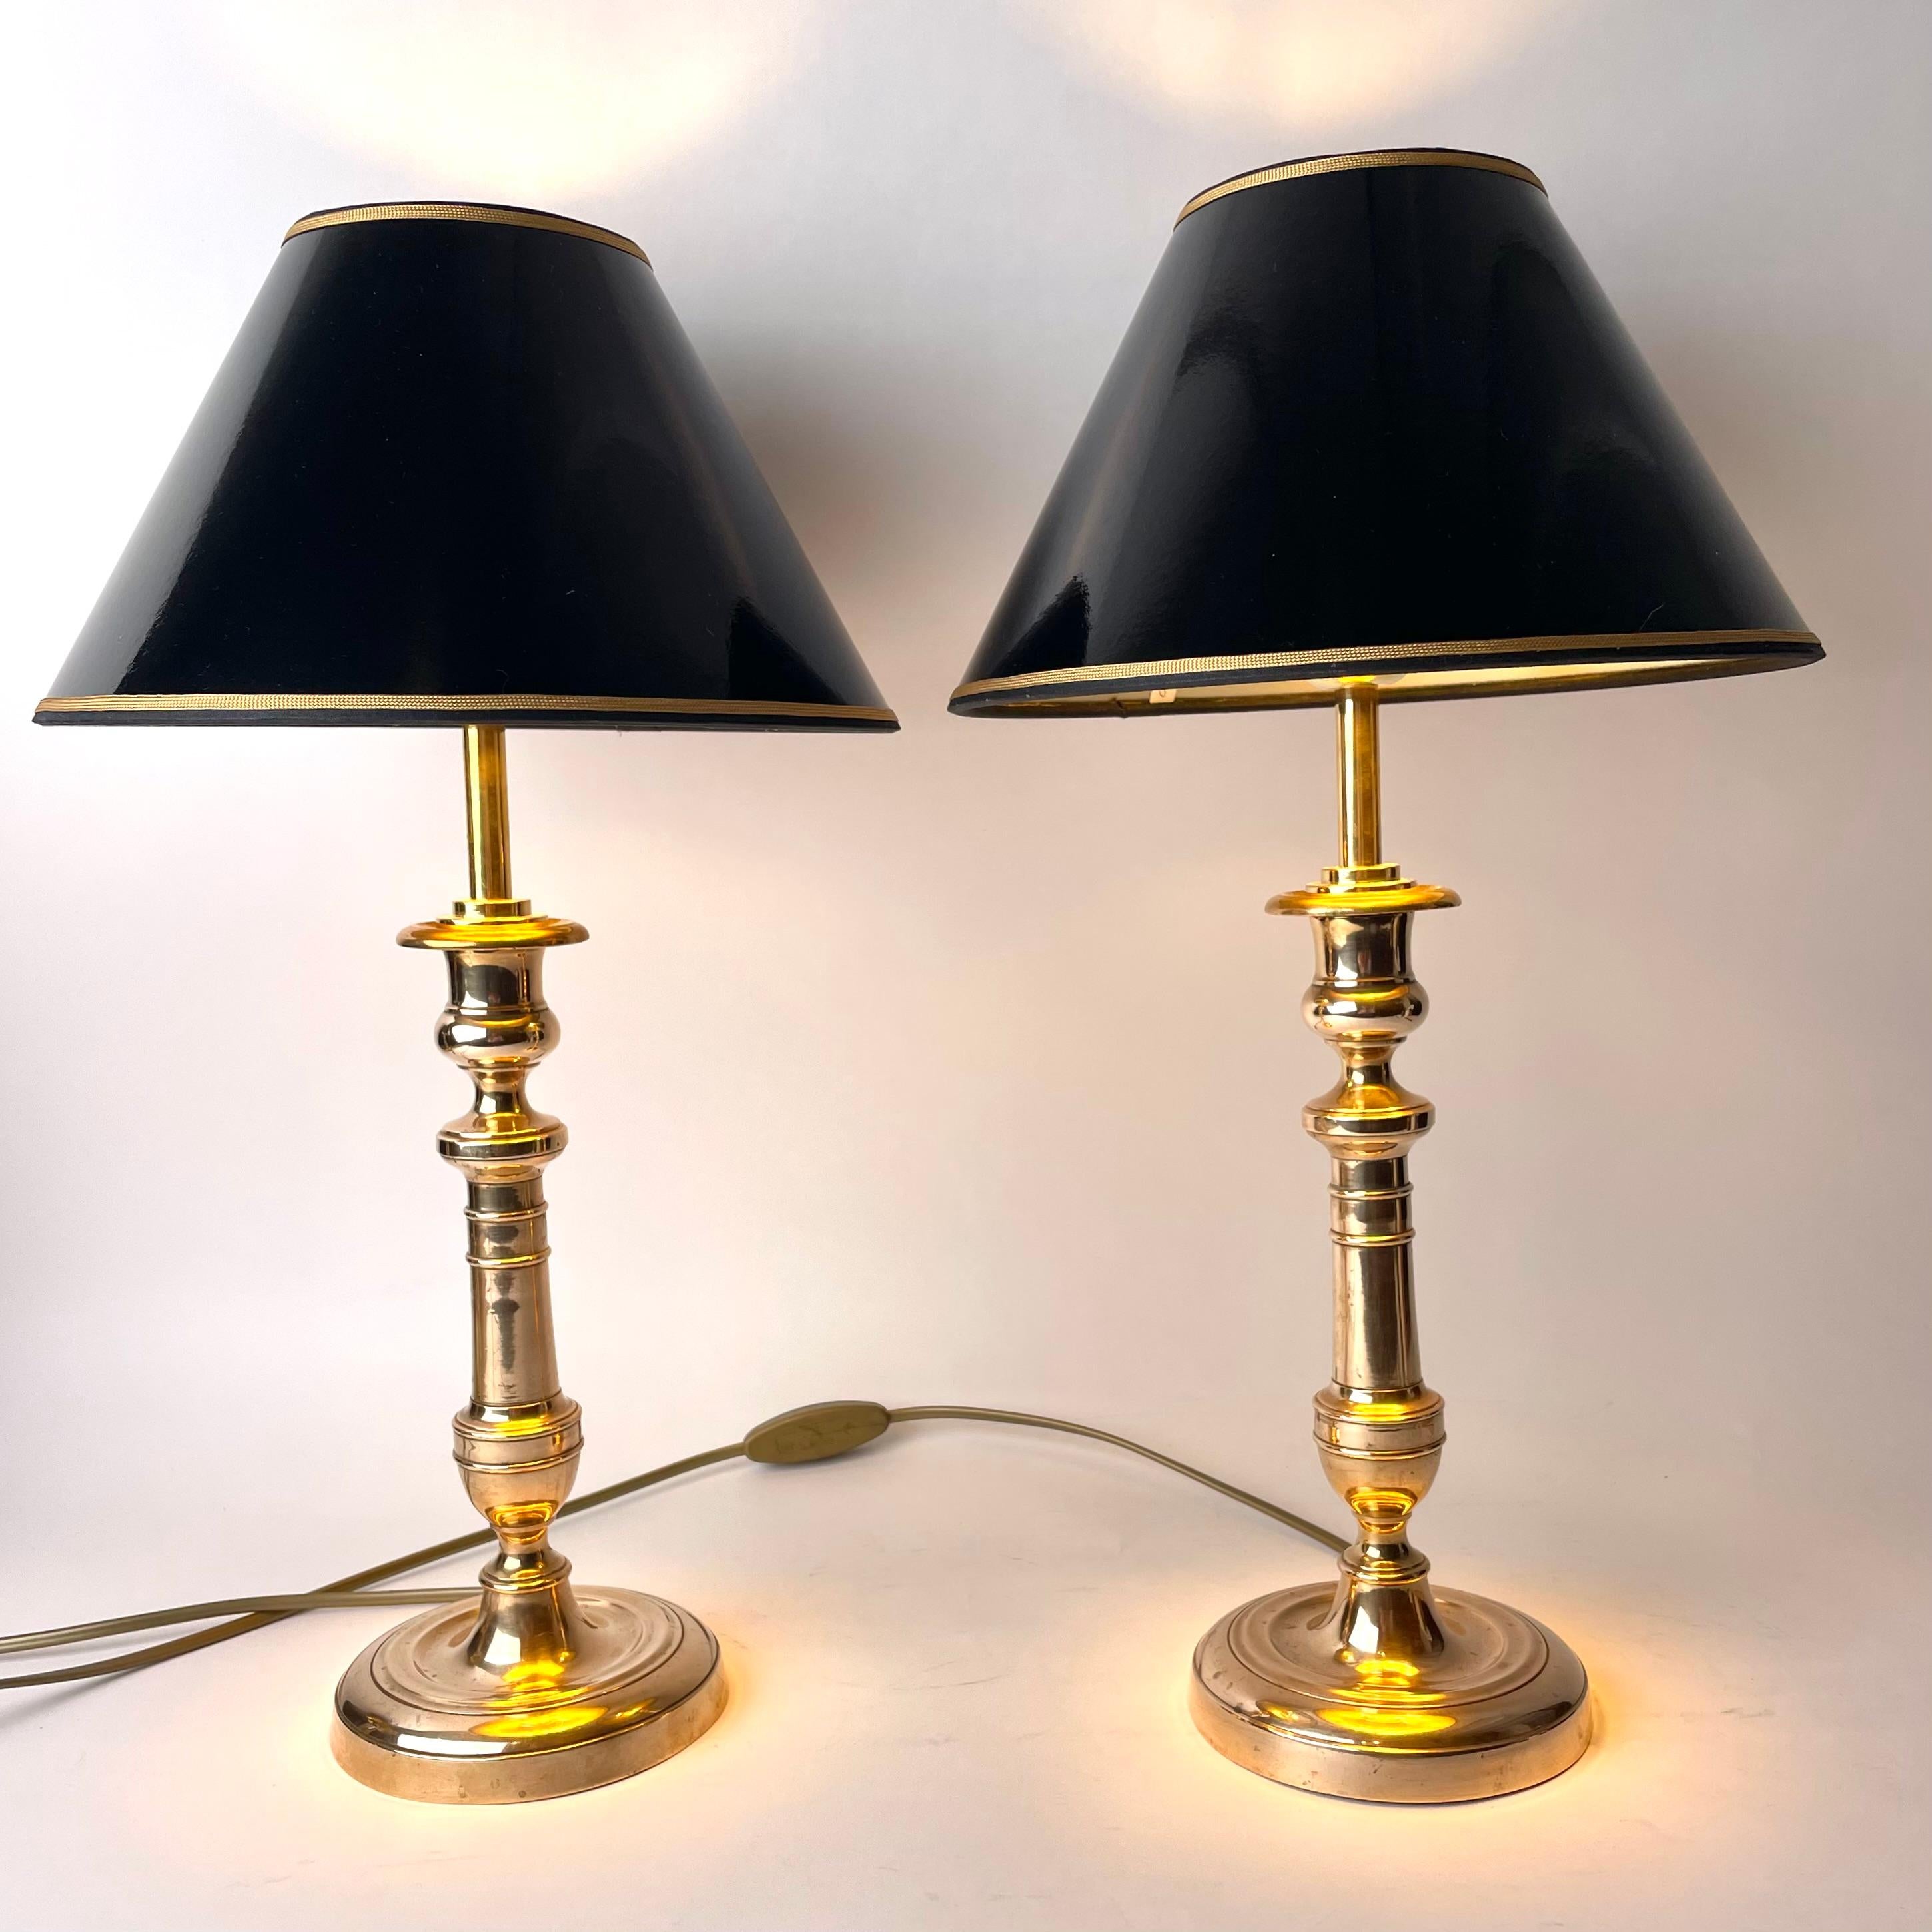 A Pair of Brass Late Empire Candlesticks, 1830s-1840s

These Empire table lamps have a refined classical appearance typical of the French Empire. They combine neoclassical architectural forms of urns and columns in a seamless manner, all while